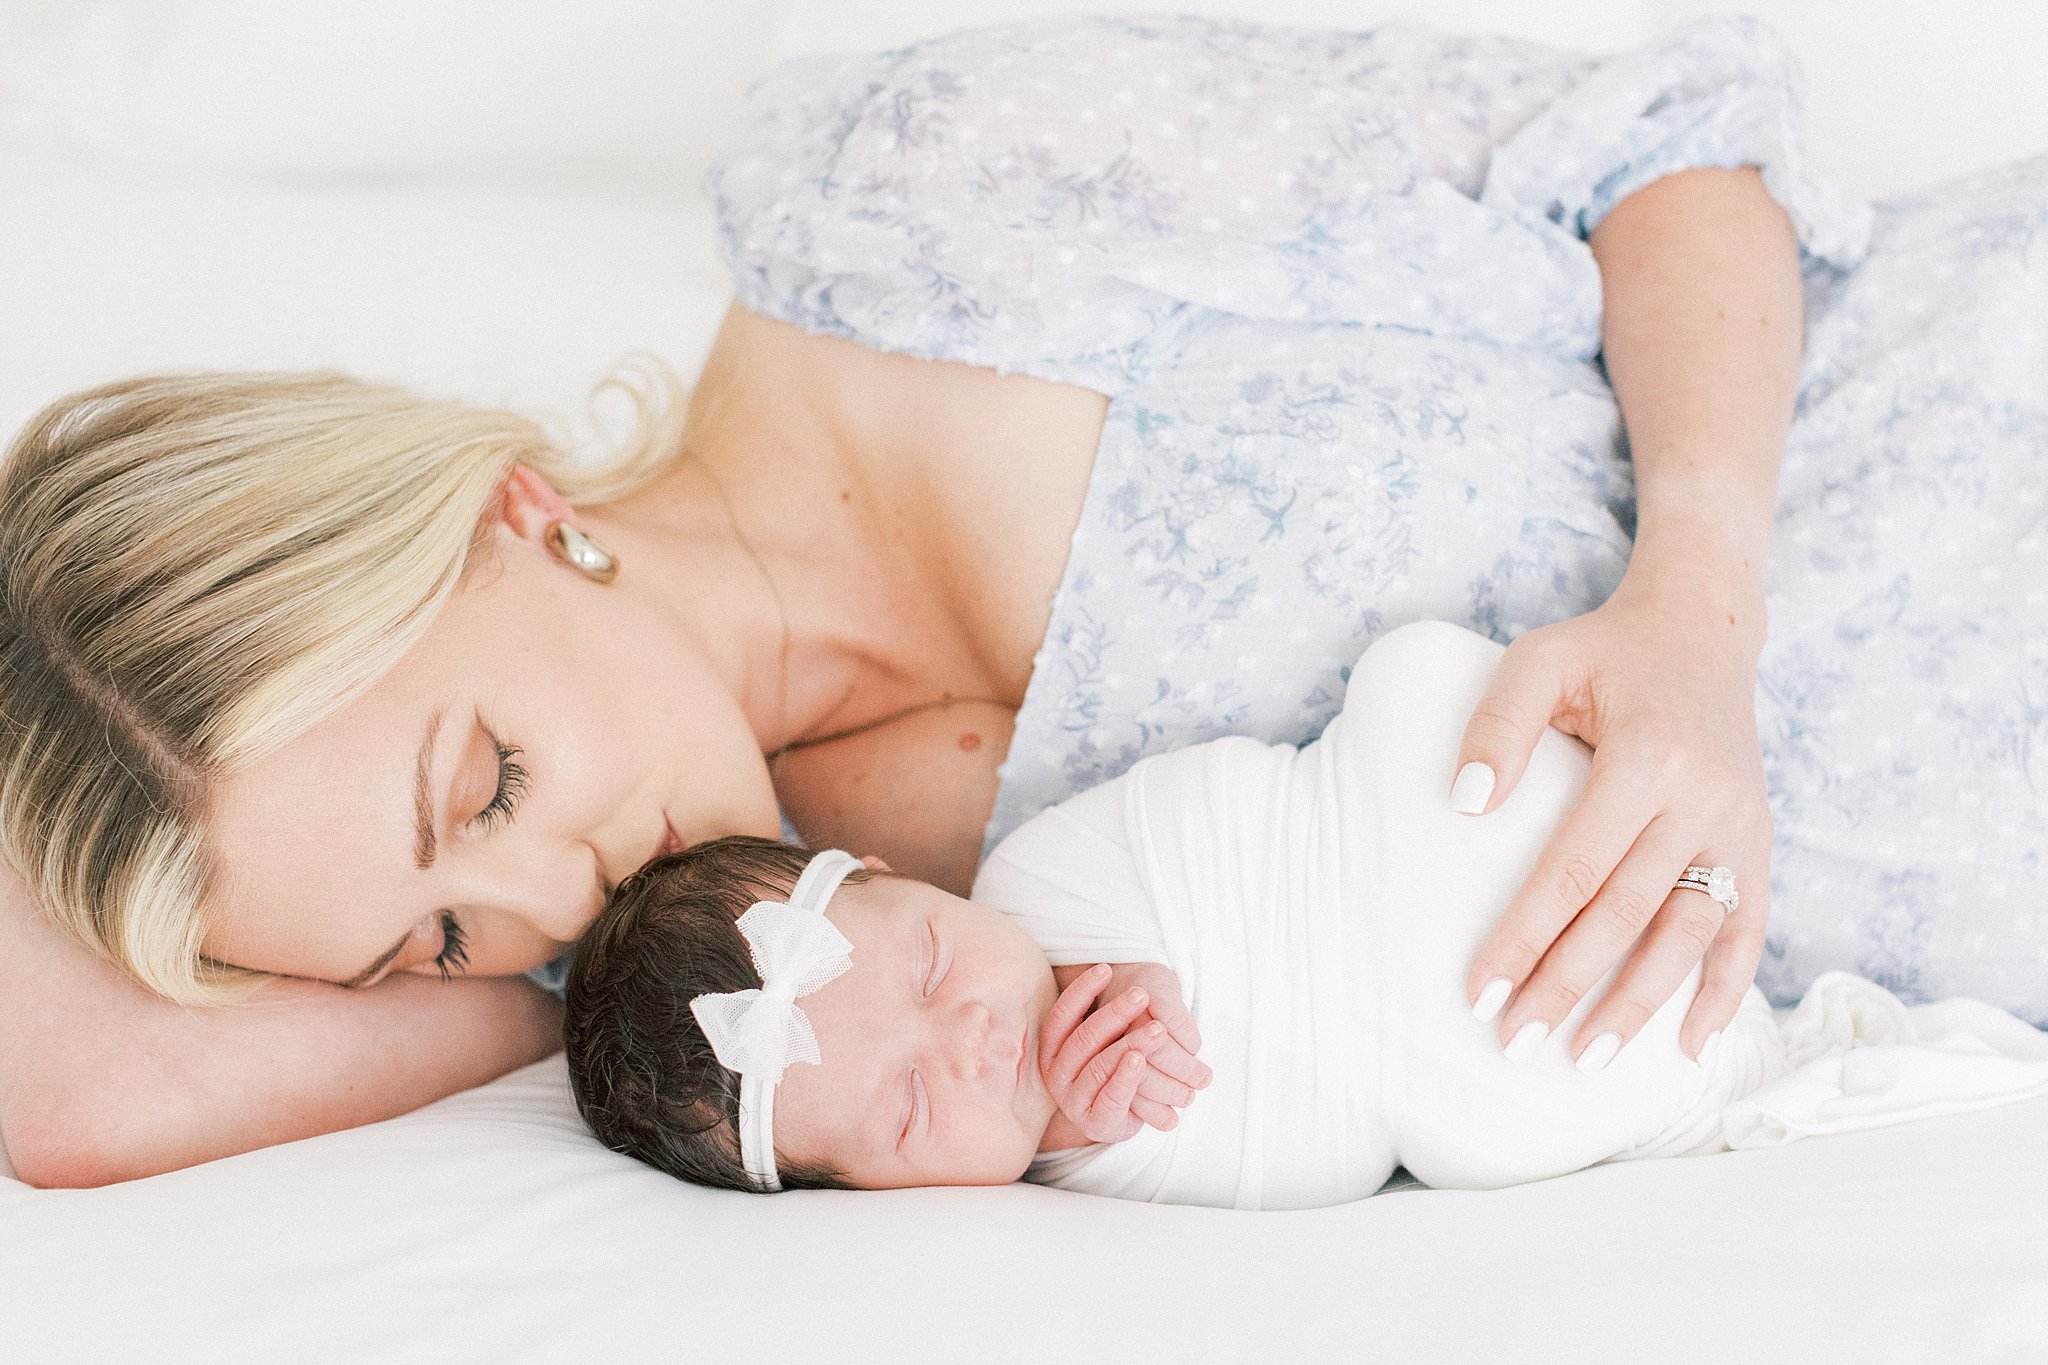 A mother cuddles alongside her sleeping newborn daughter wearing a white swaddle and white bow headband Dallas baby boutiques